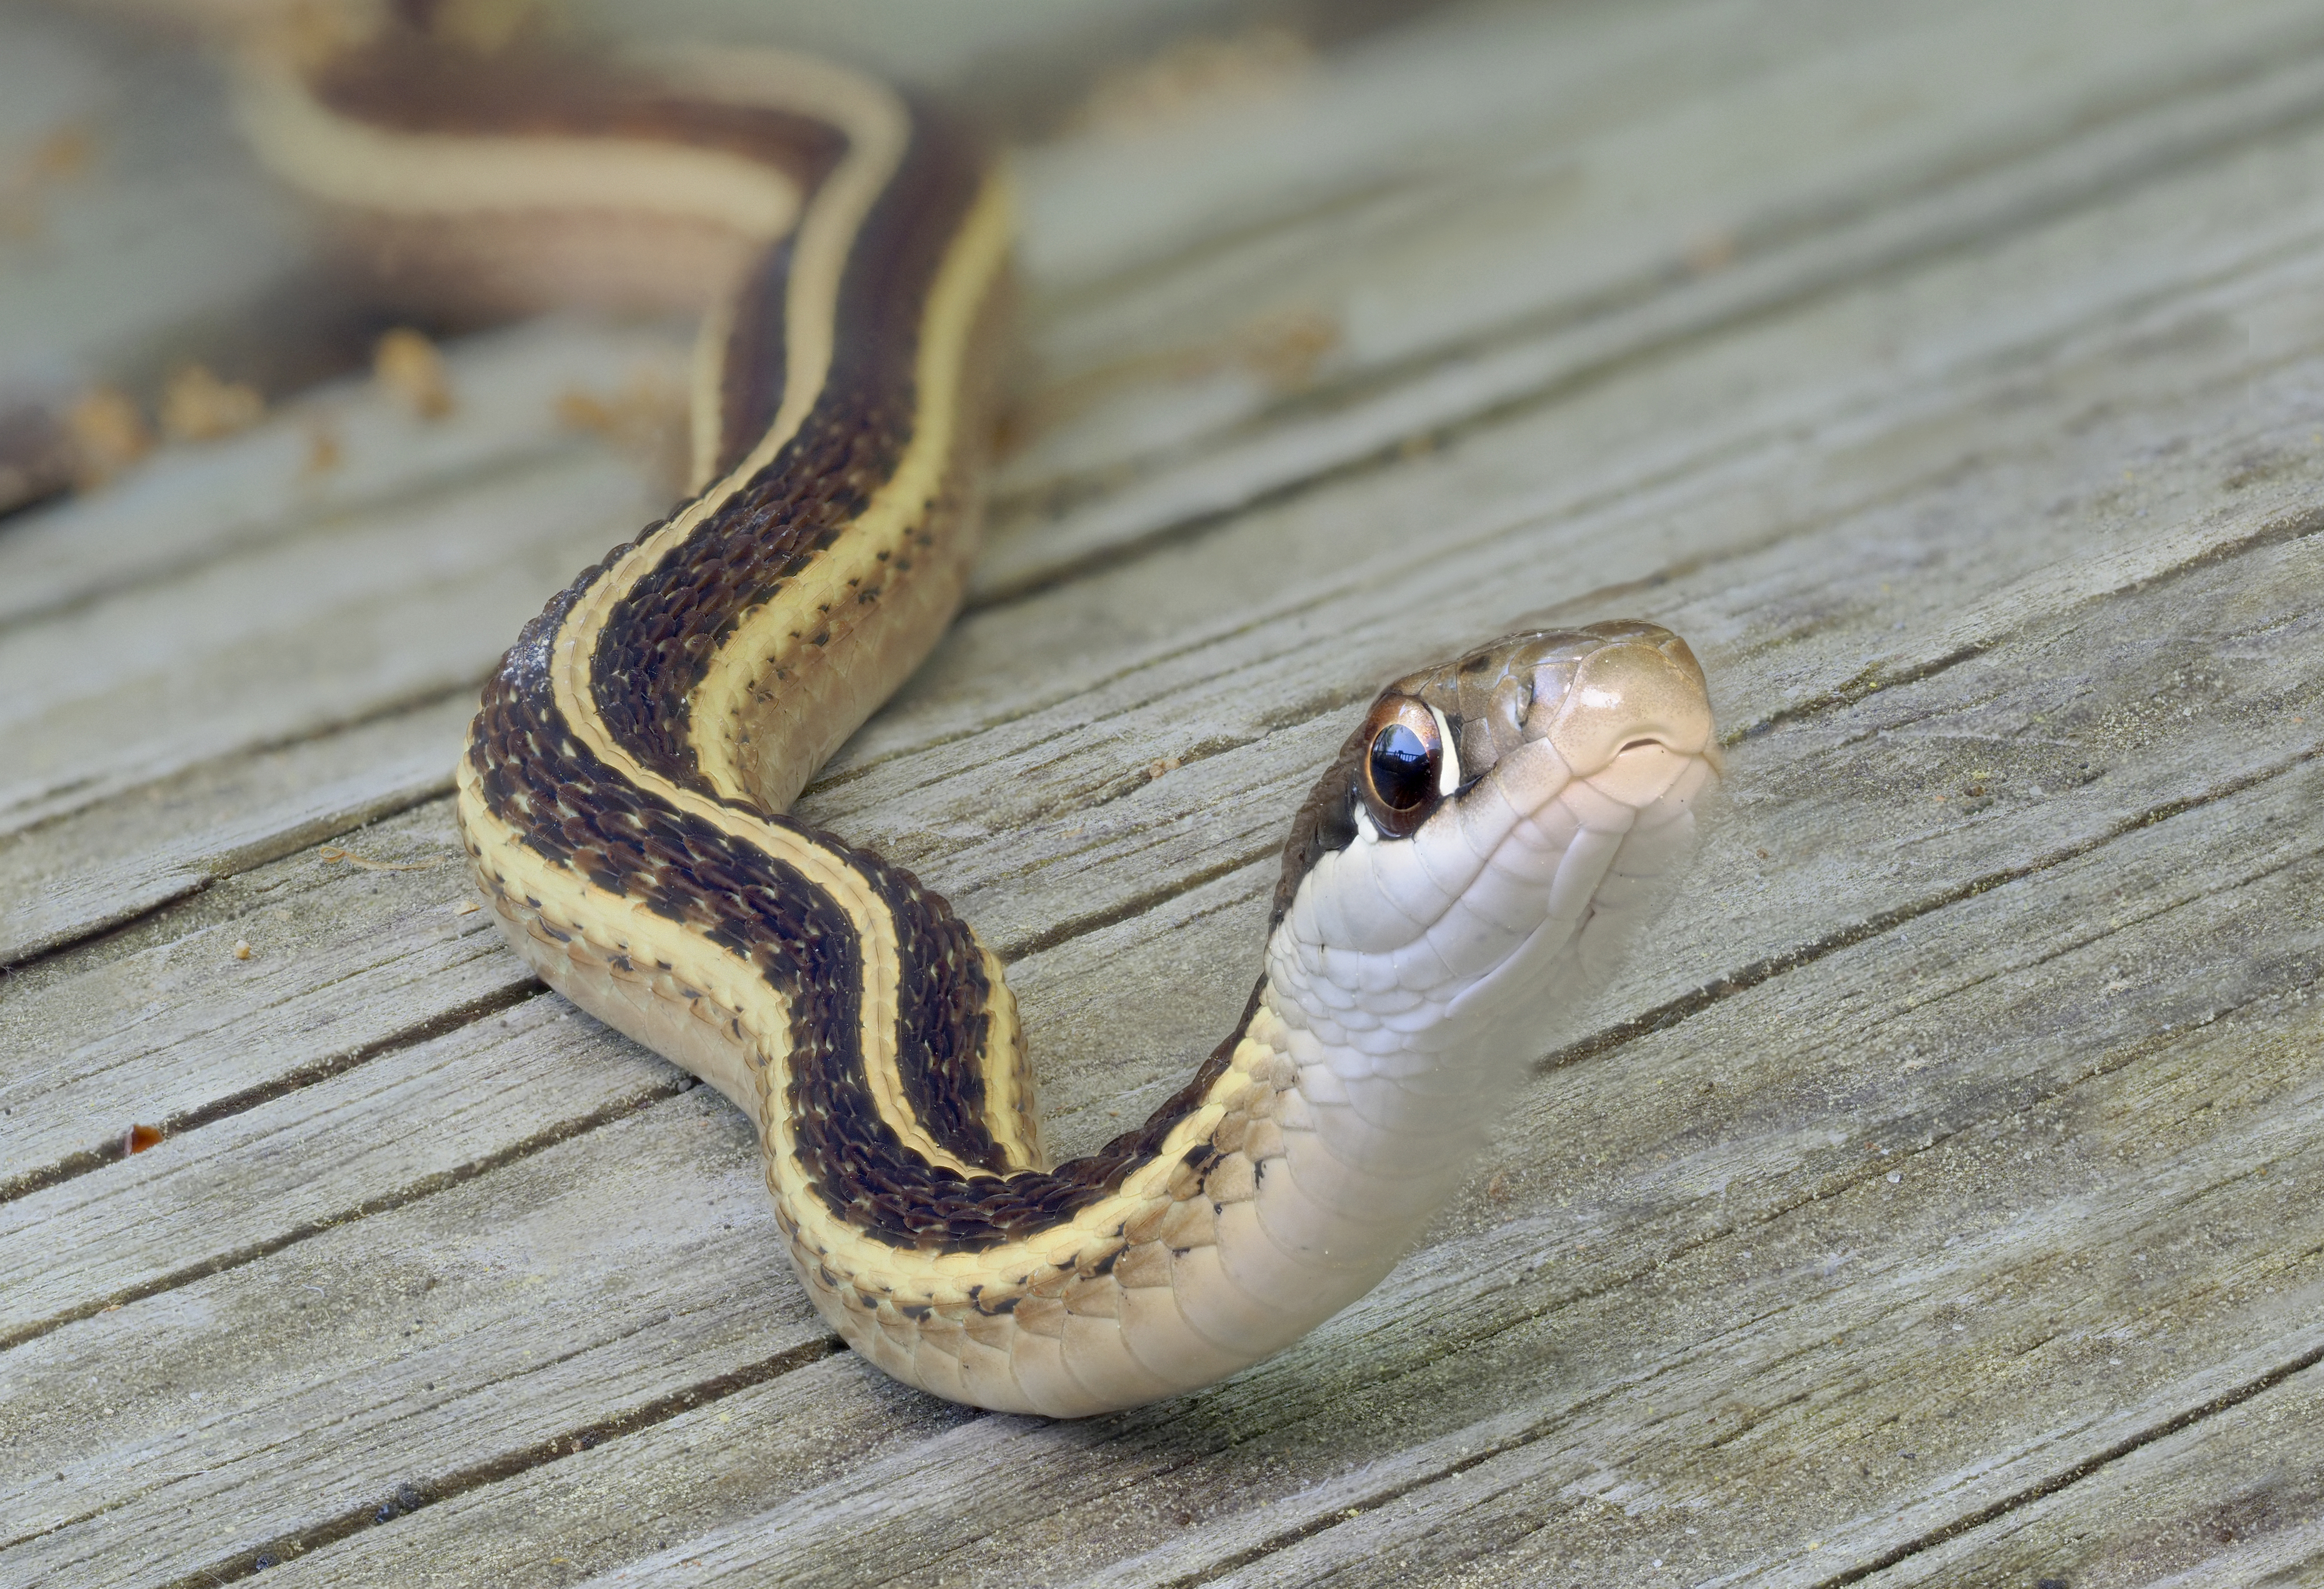 A close-up of a garter snake slithering on a wooden surface, showcasing its head and distinctive striped pattern along its body